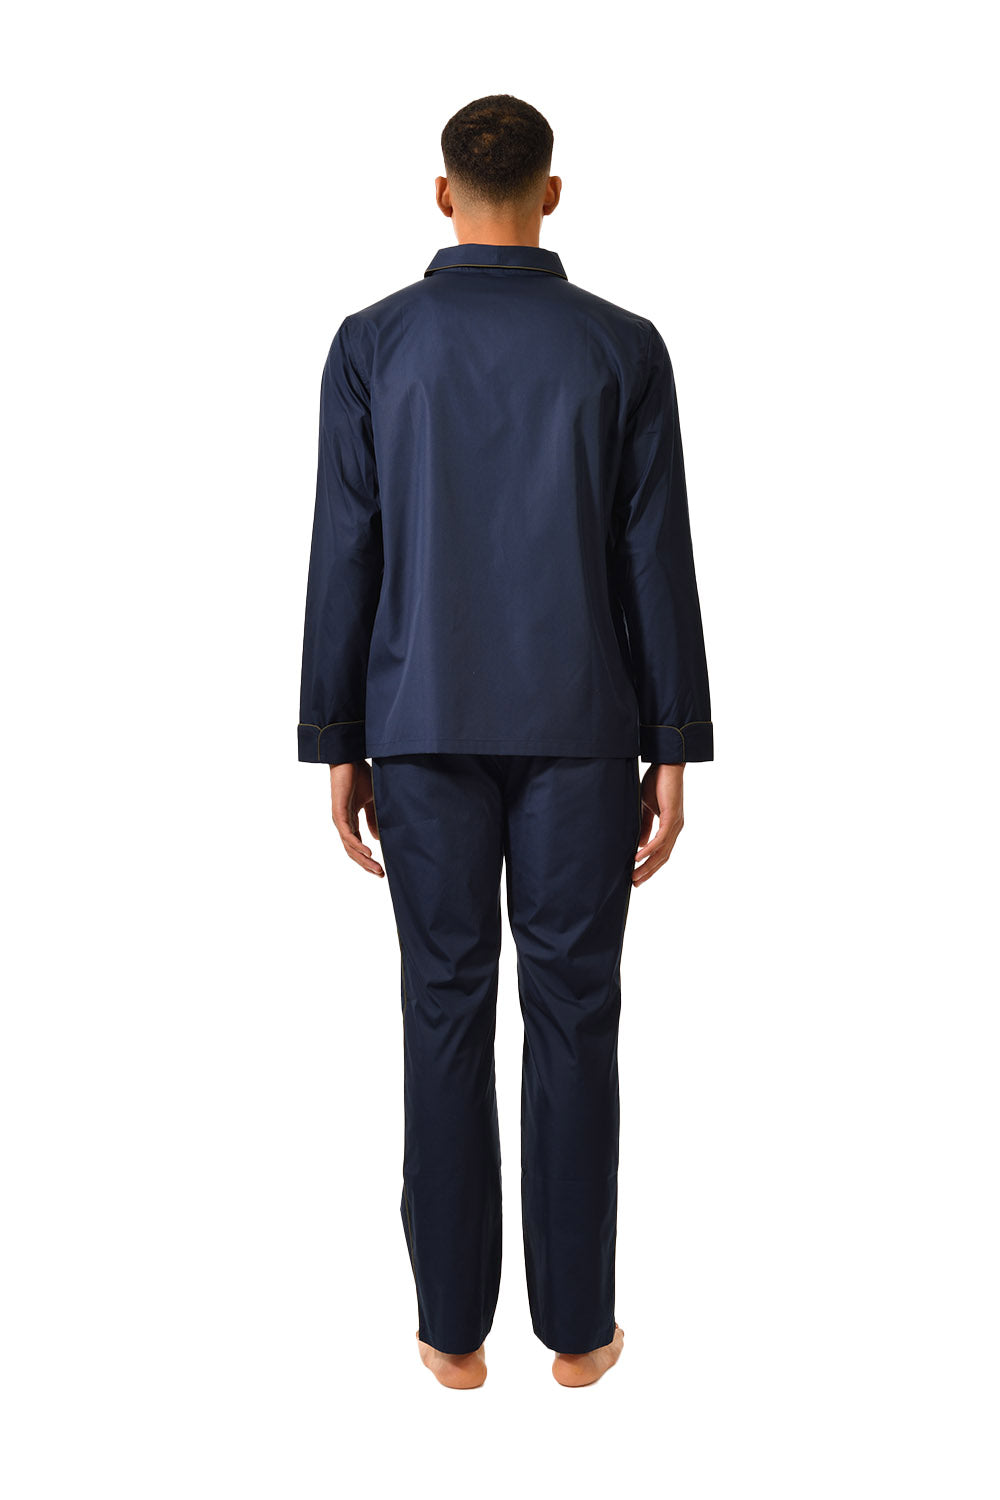 The Waldorf in navy cotton broadcloth